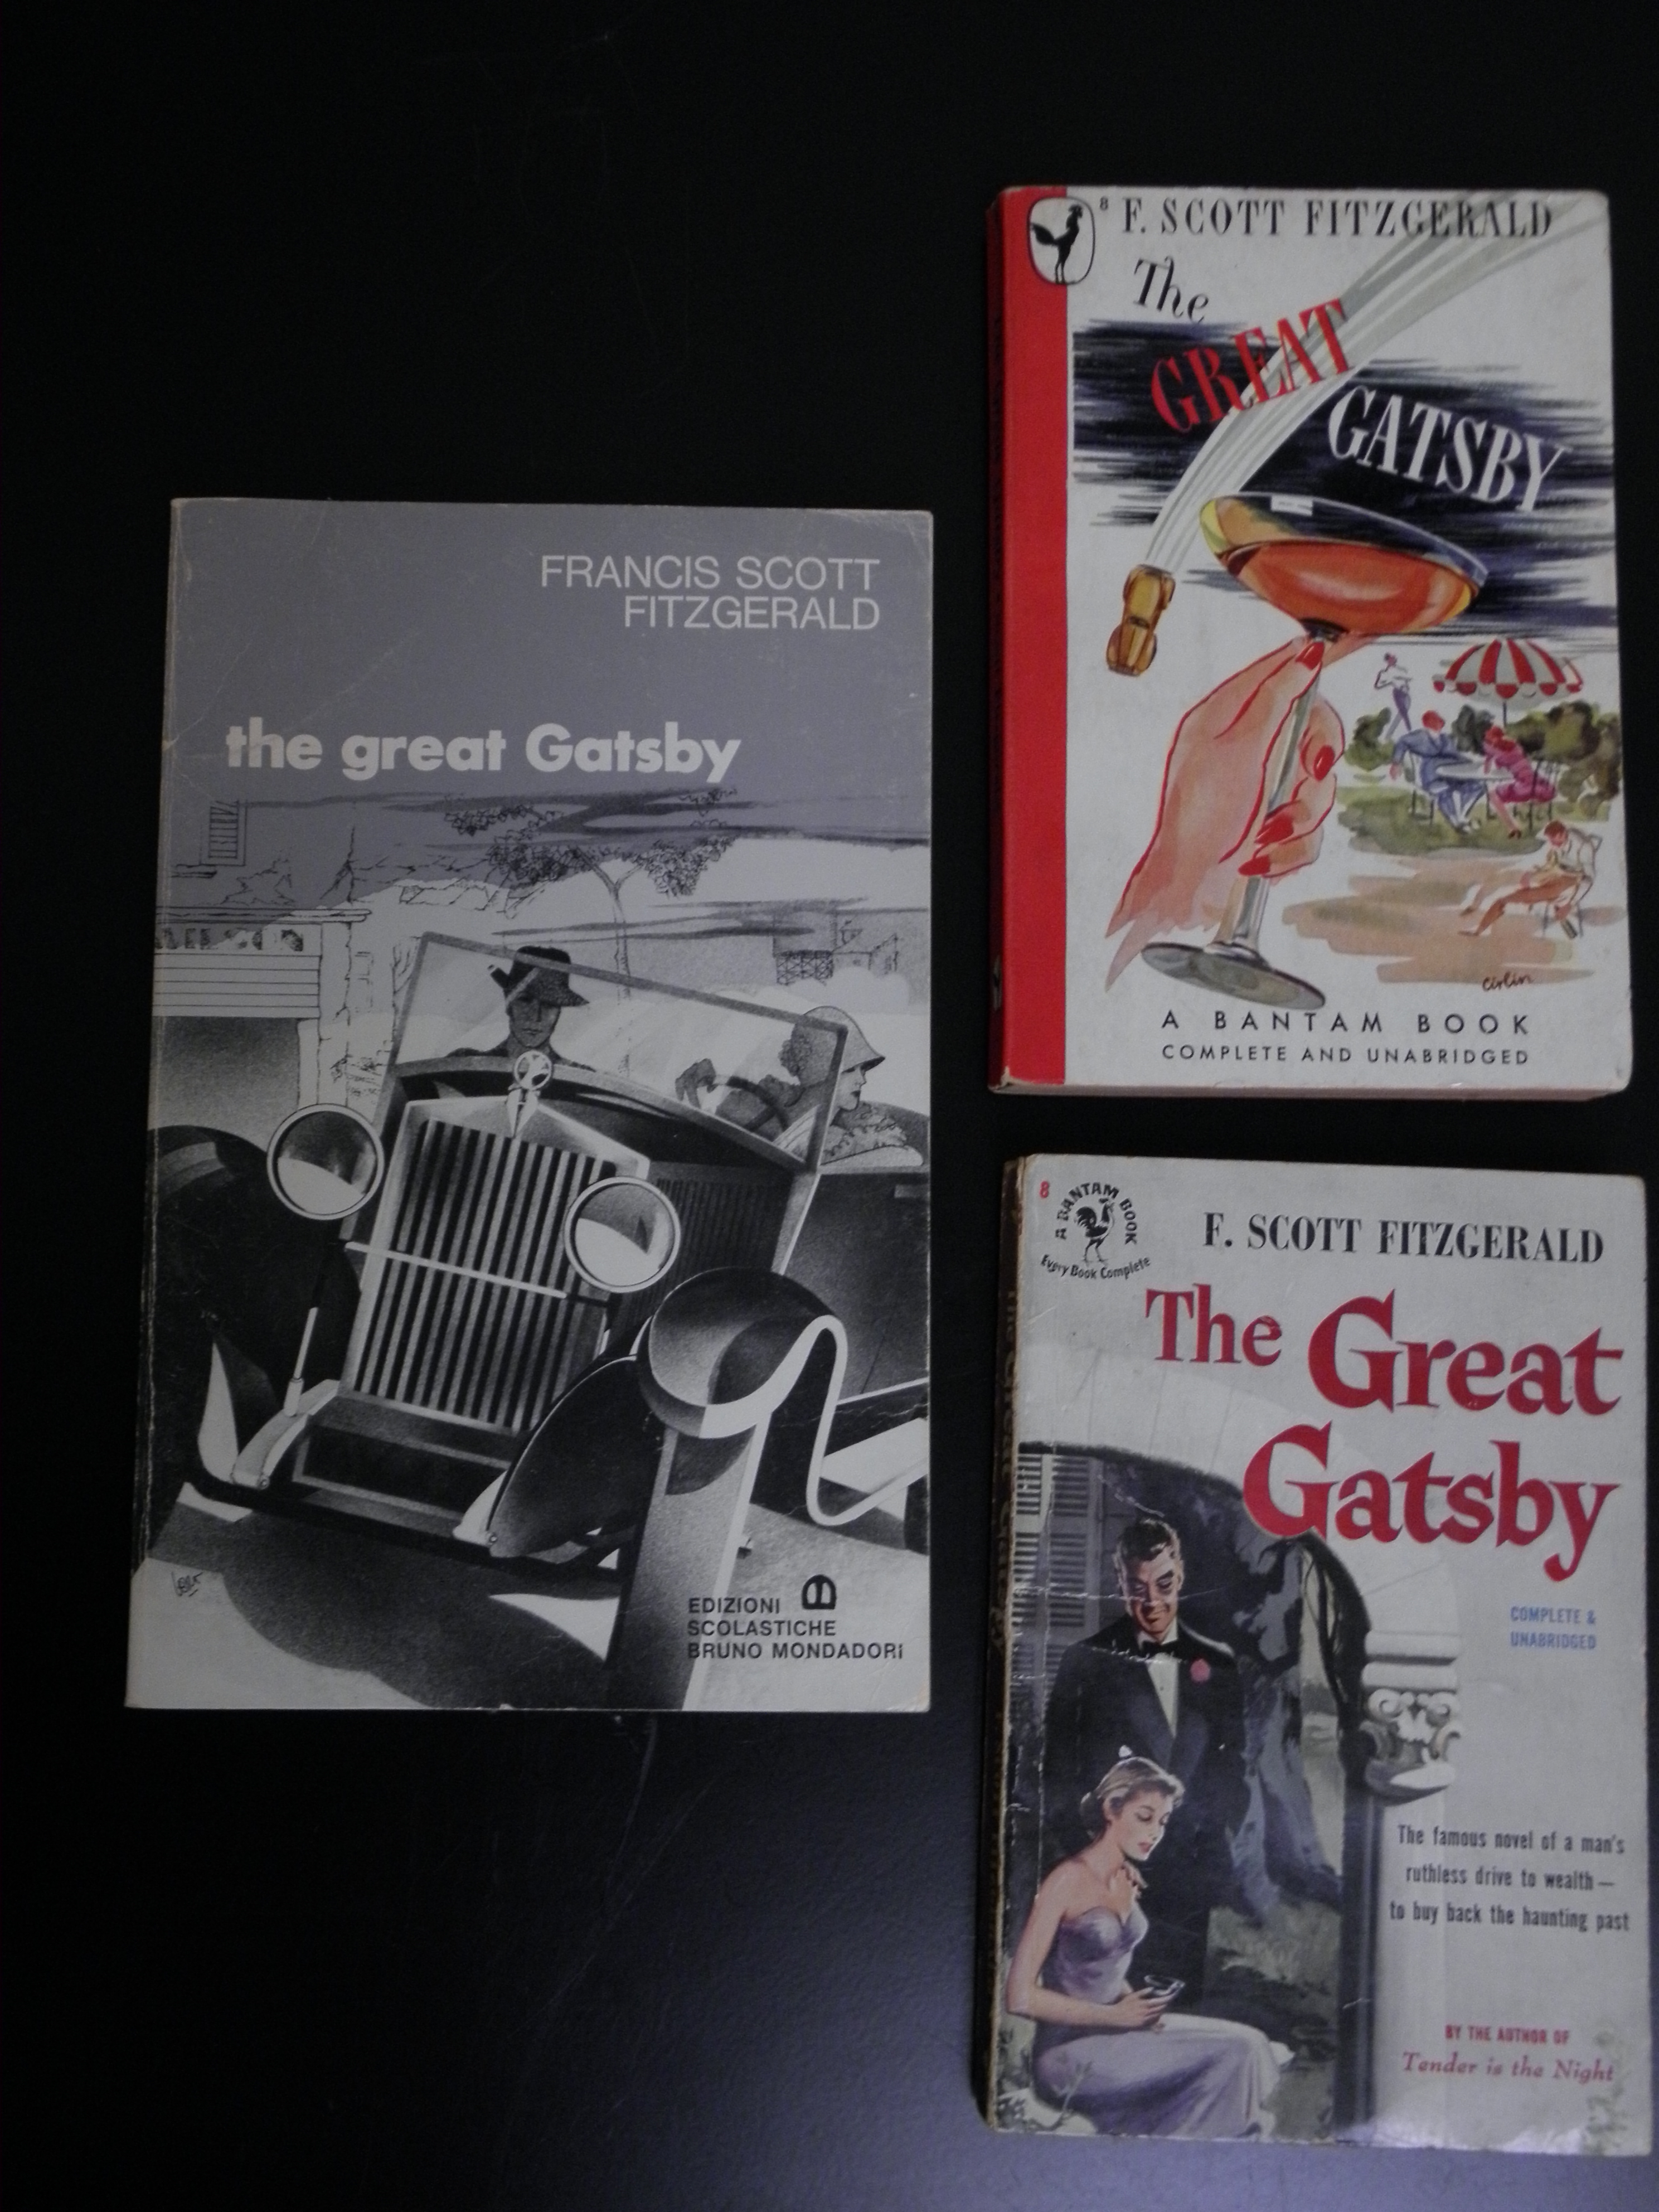 Various paperback editions of The Great Gatsby (clockwise, English language, Italian printing: PS 3511 .I9G7 1977; with martini glass: PS3511 .I9G7 .1945; with girl in purple dress:   PS3511 .I967.  )